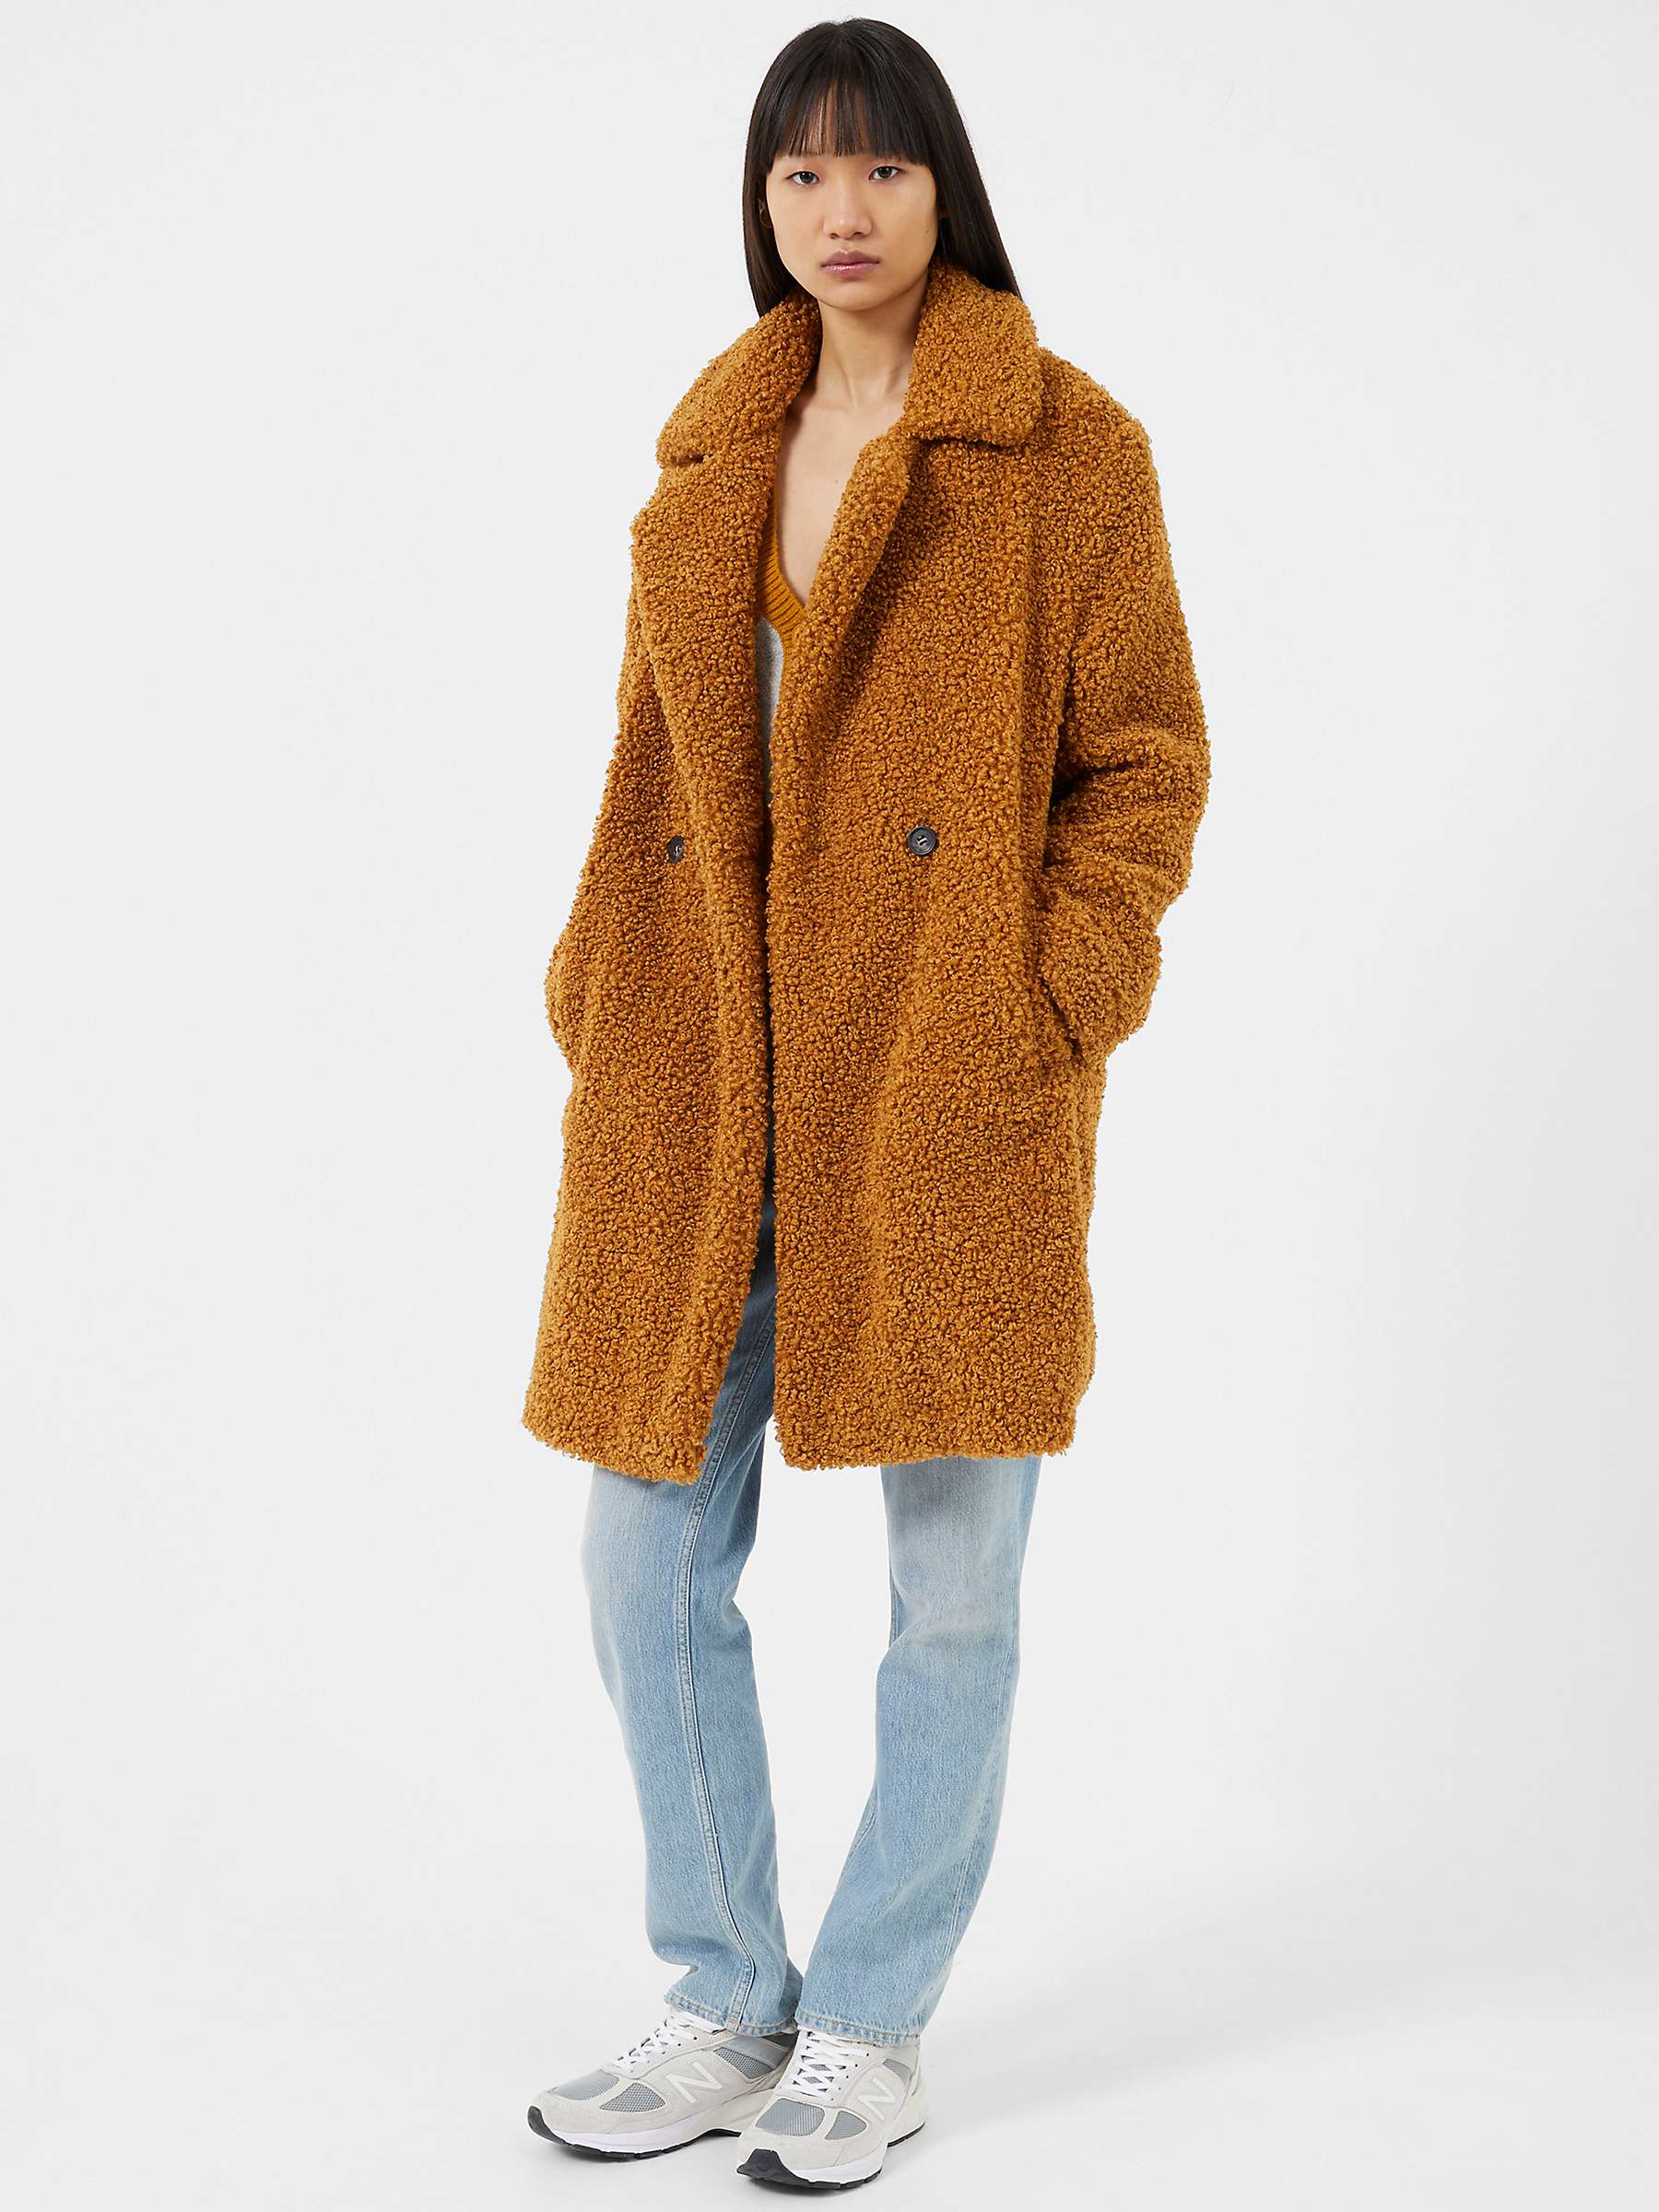 Buy French Connection Callie Iren Borg Double Breasted Coat Online at johnlewis.com